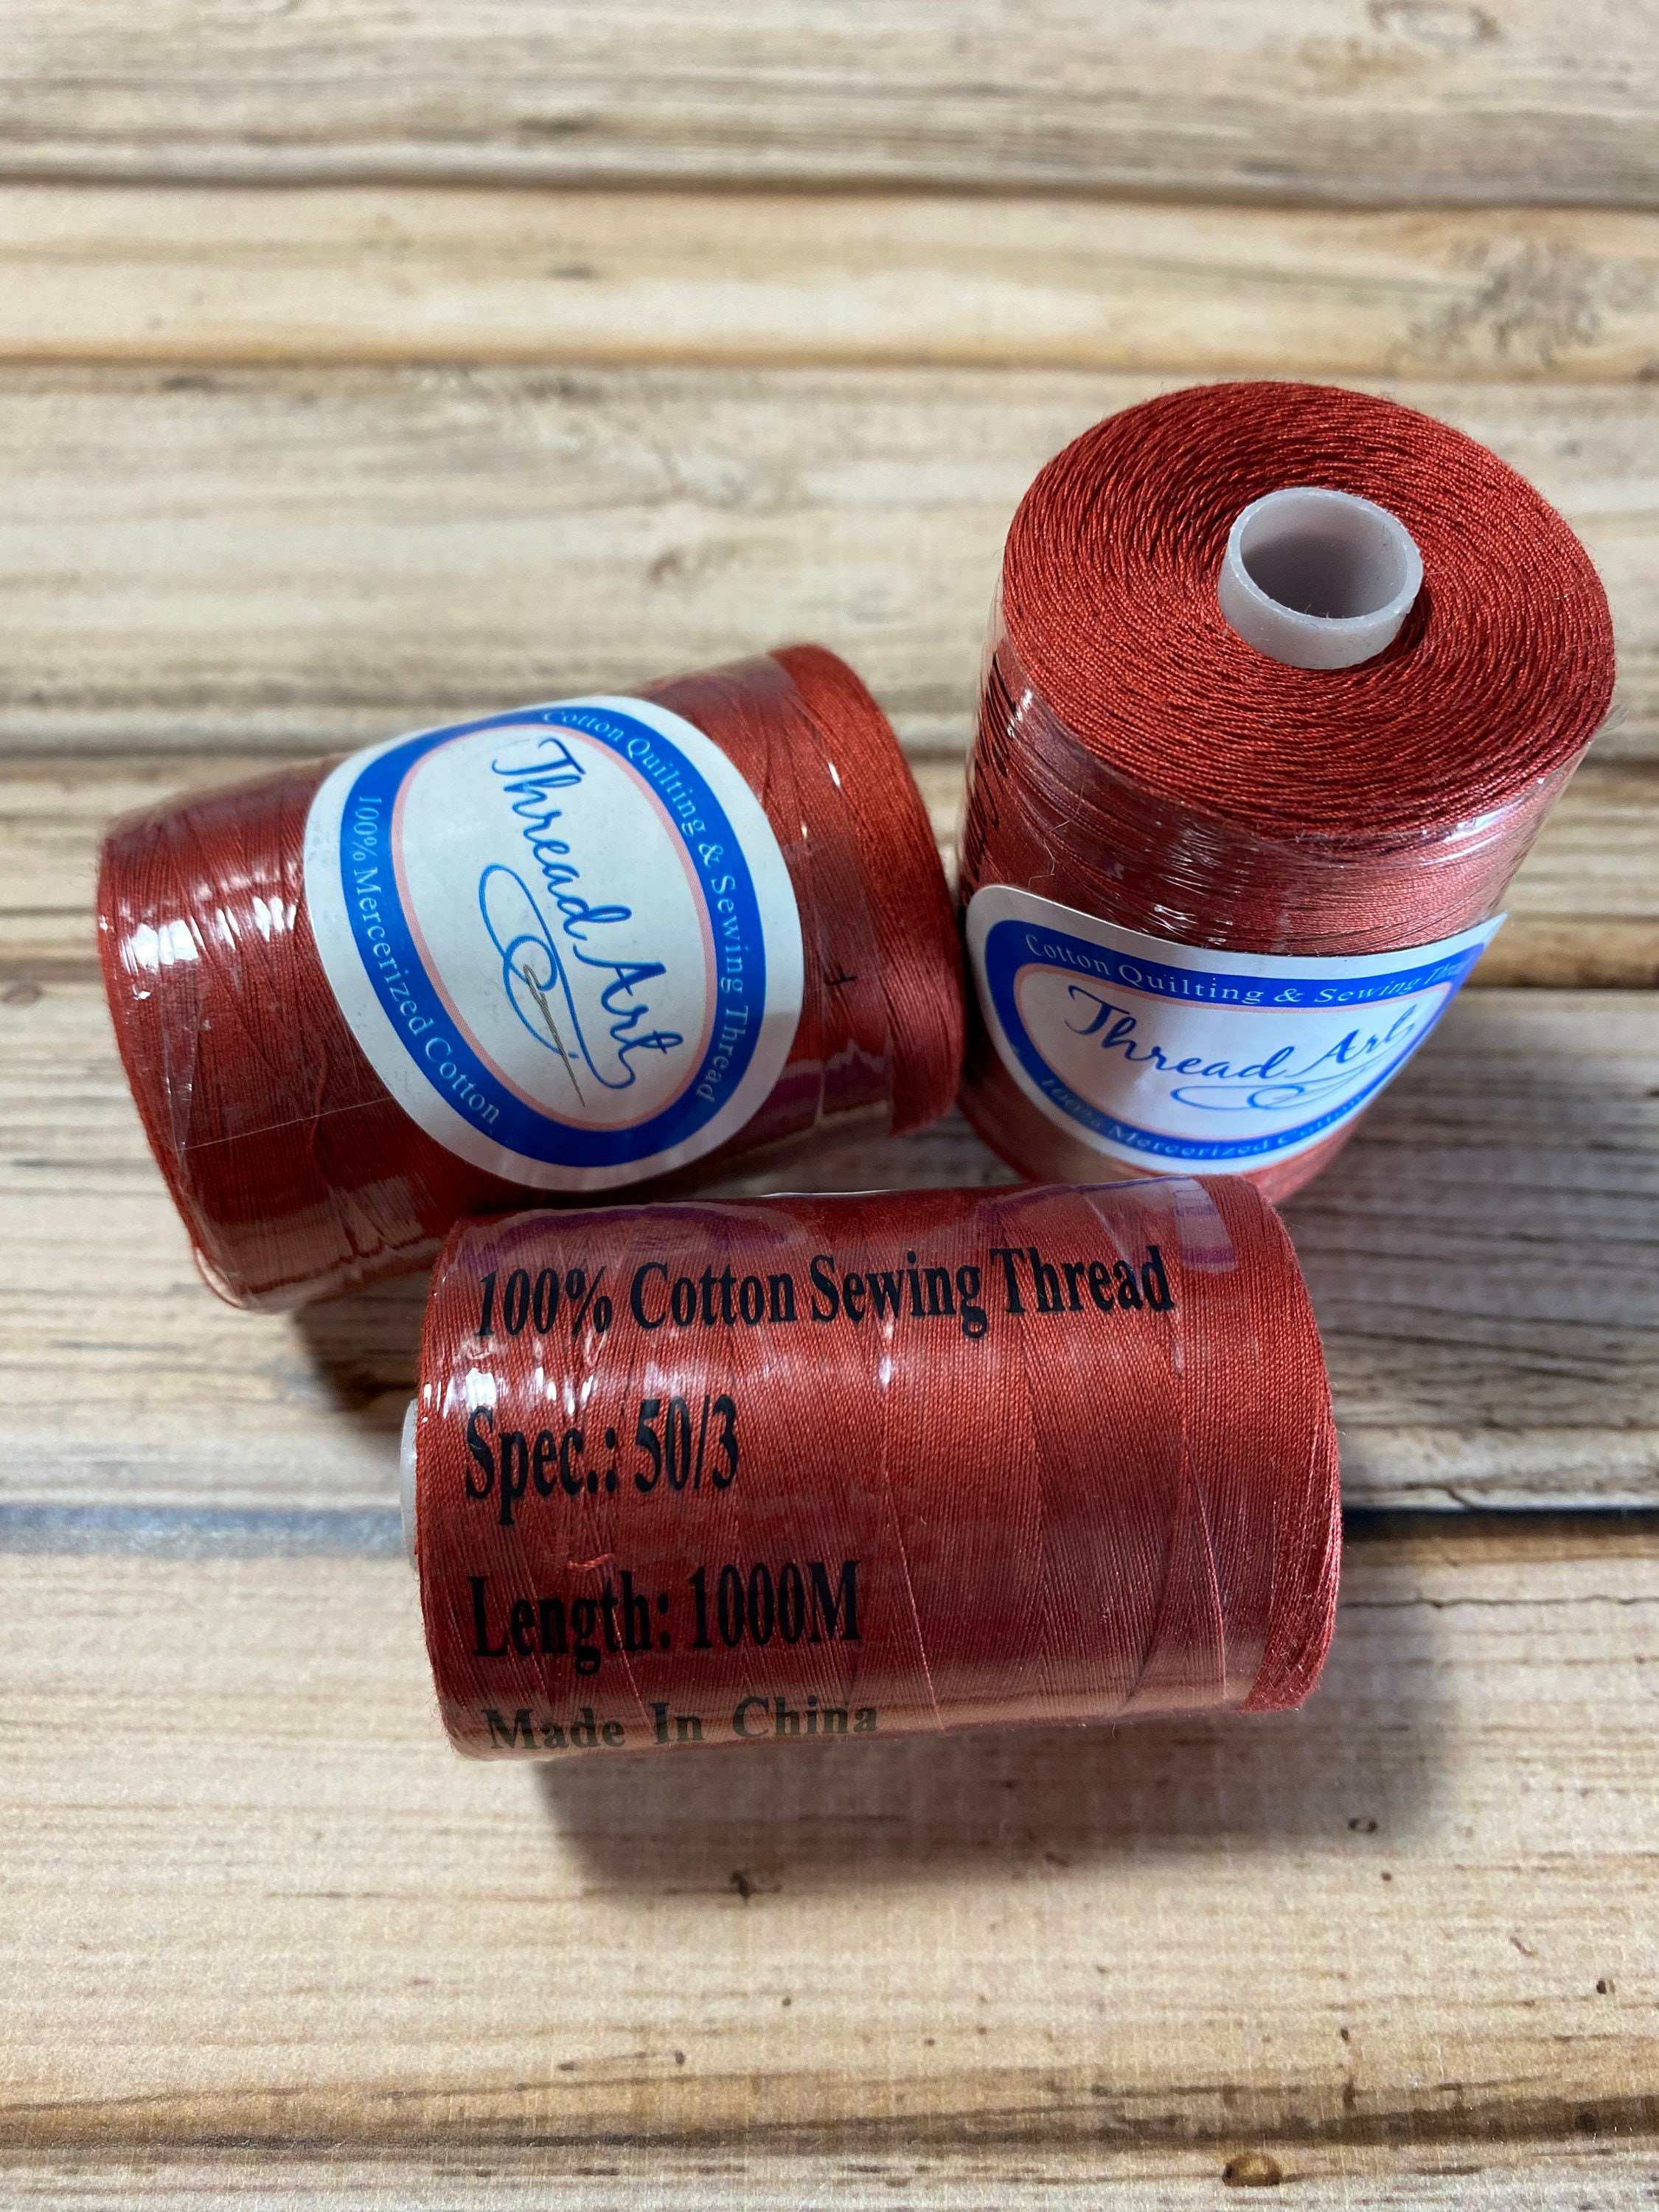 Sewing thread cotton red 1000m